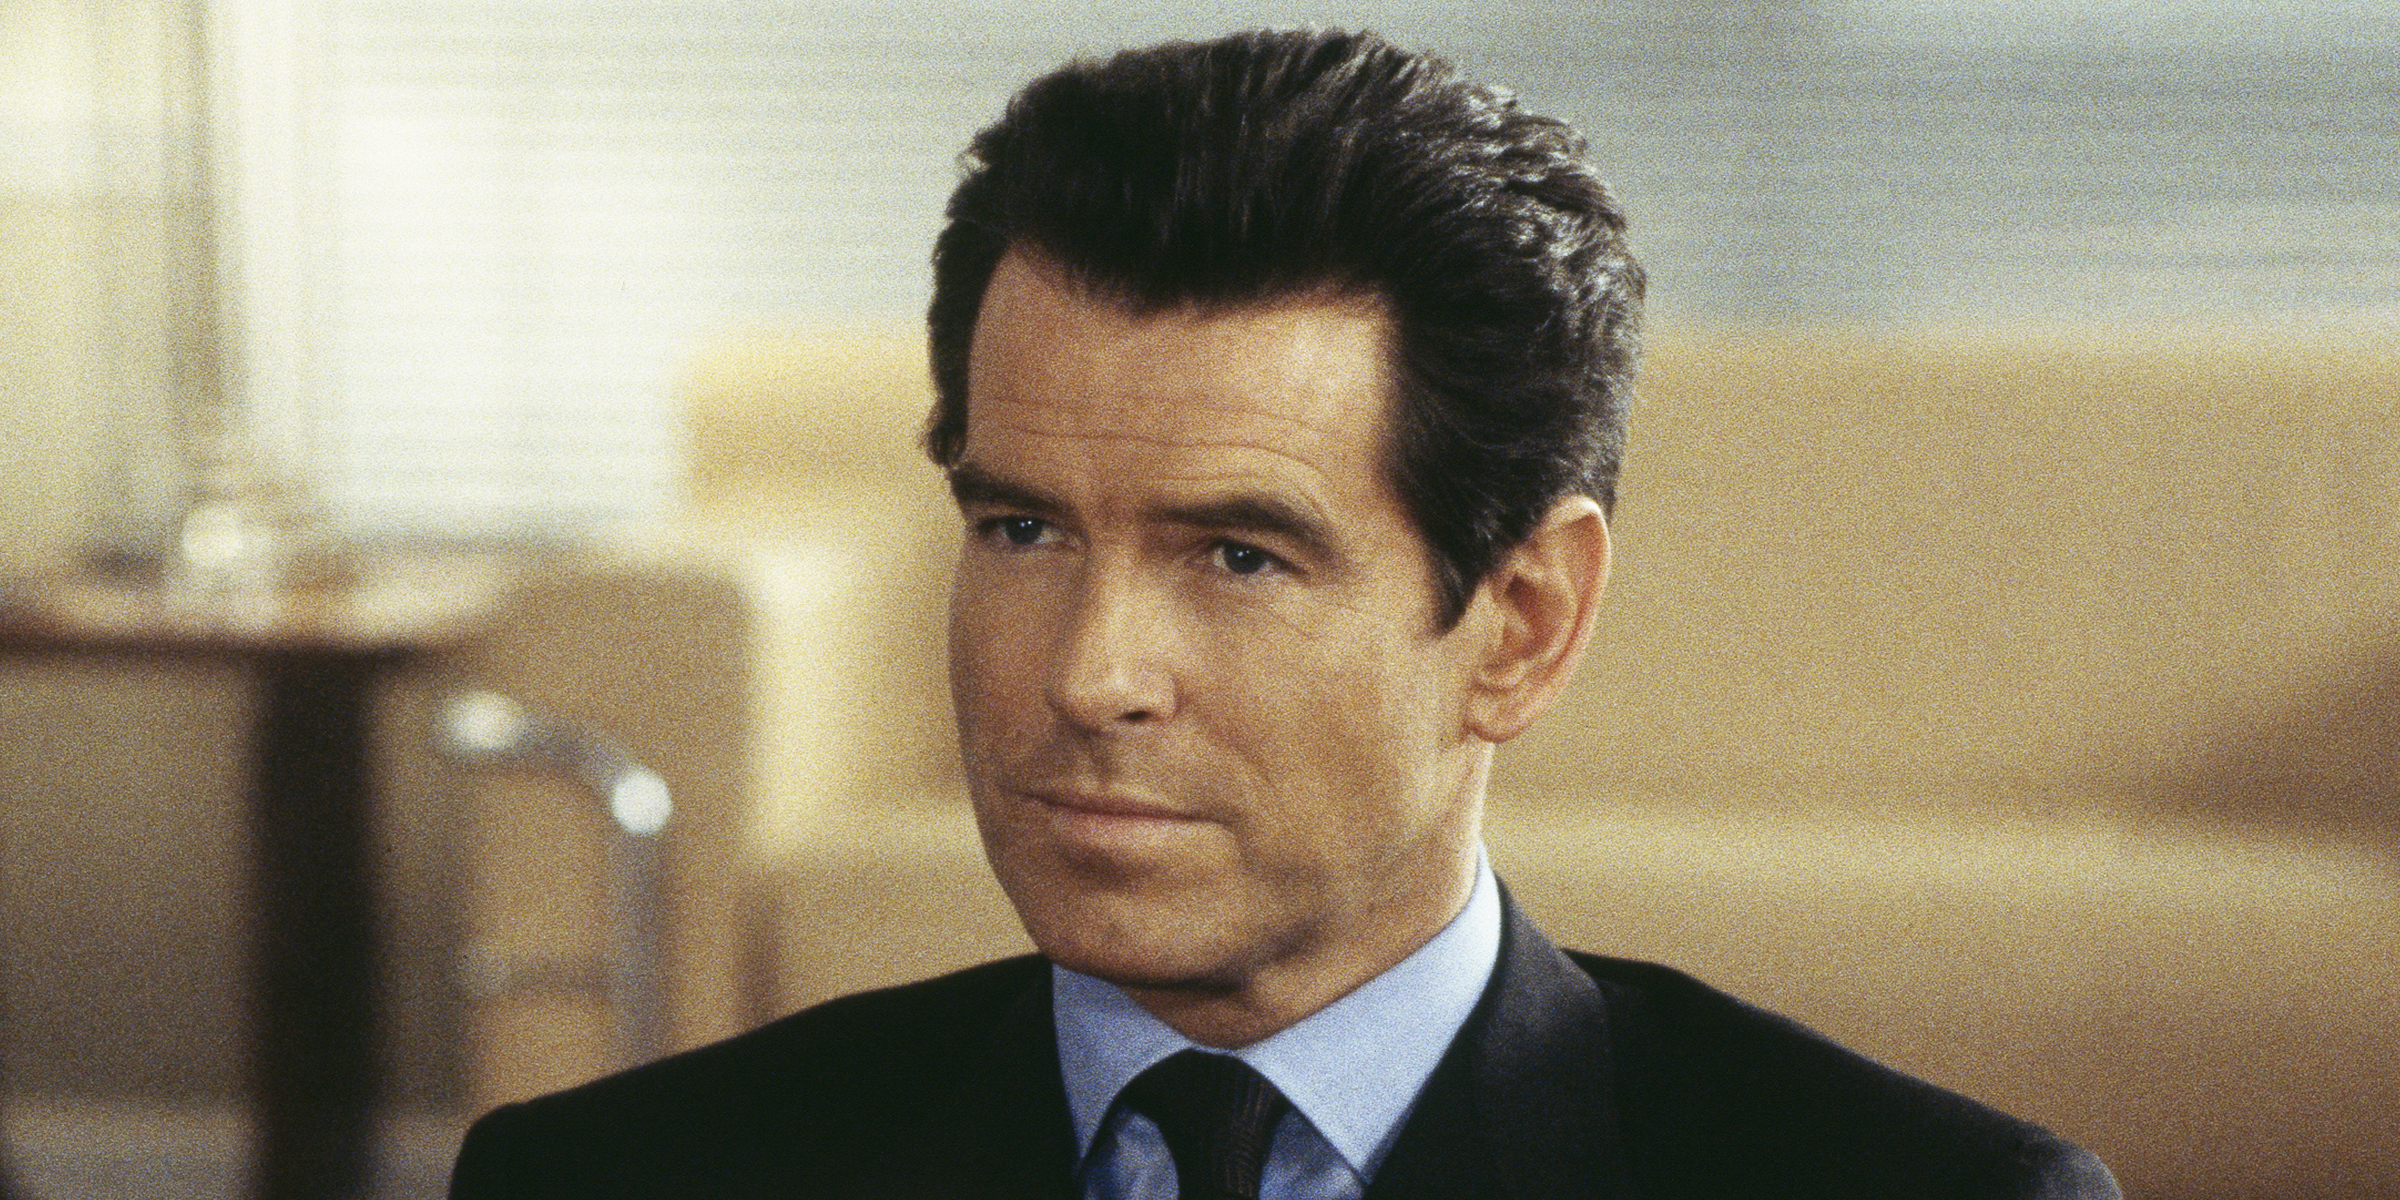 Pierce Brosnan, 1999 | Source : Getty Images